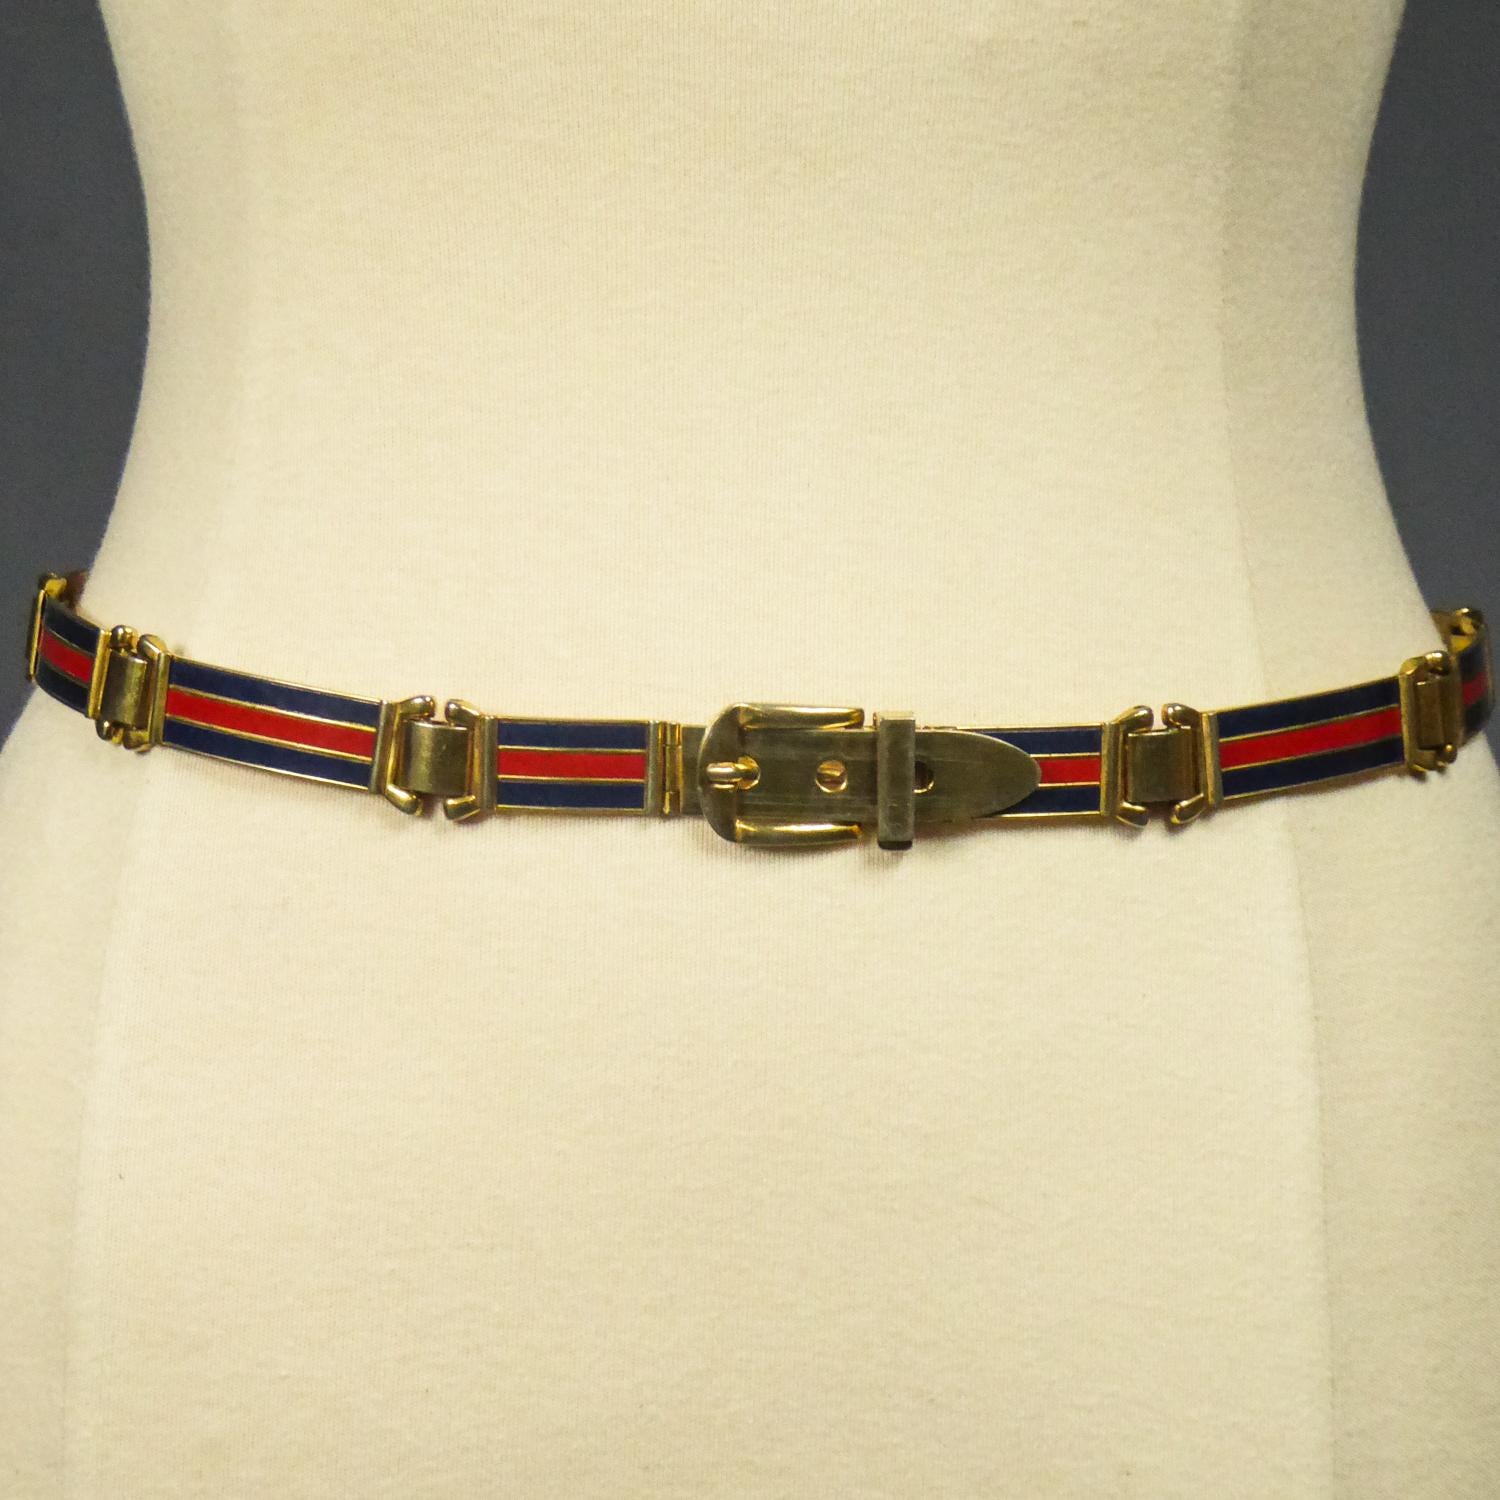 Circa 1980
Italy

Fine Vintage belt in brass and enamel with the logo of the famous colors of the Gucci House Designer of Florence in Italy and dating from the 1980s. Shiny polished golden brass with long enamelled links with red and navy blue